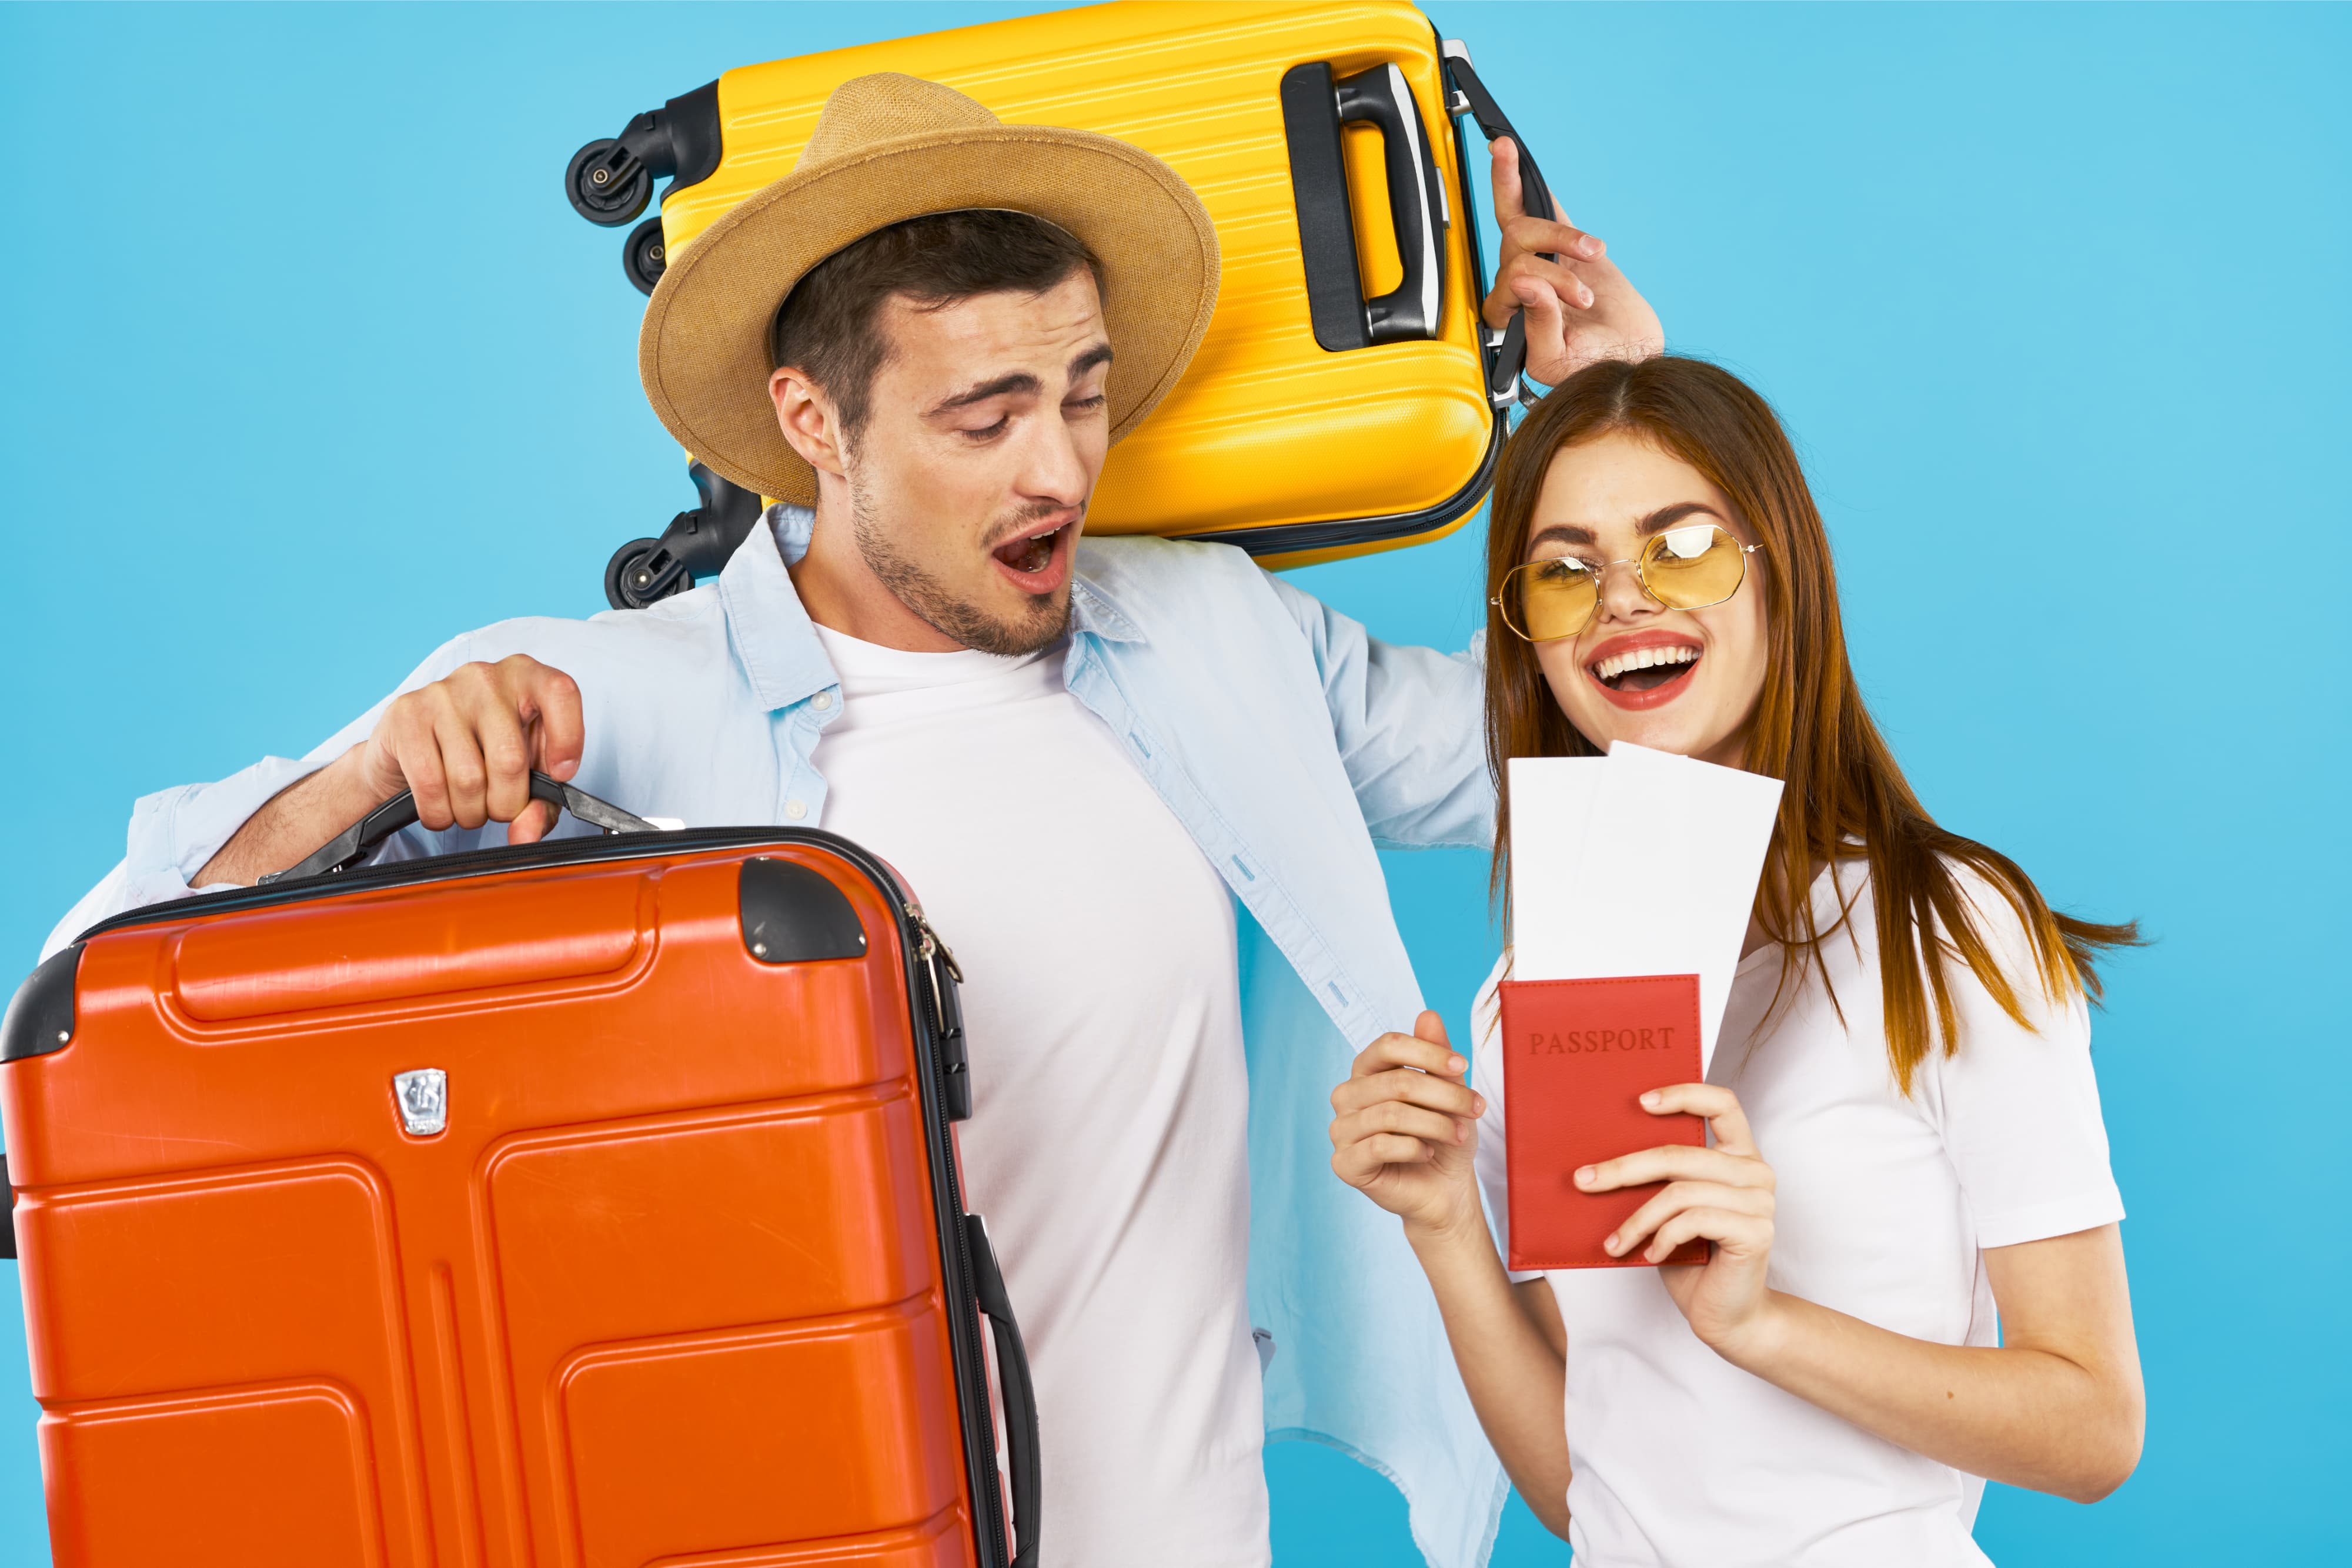 Young couple with suitcases tourism travel passport and plane ticket